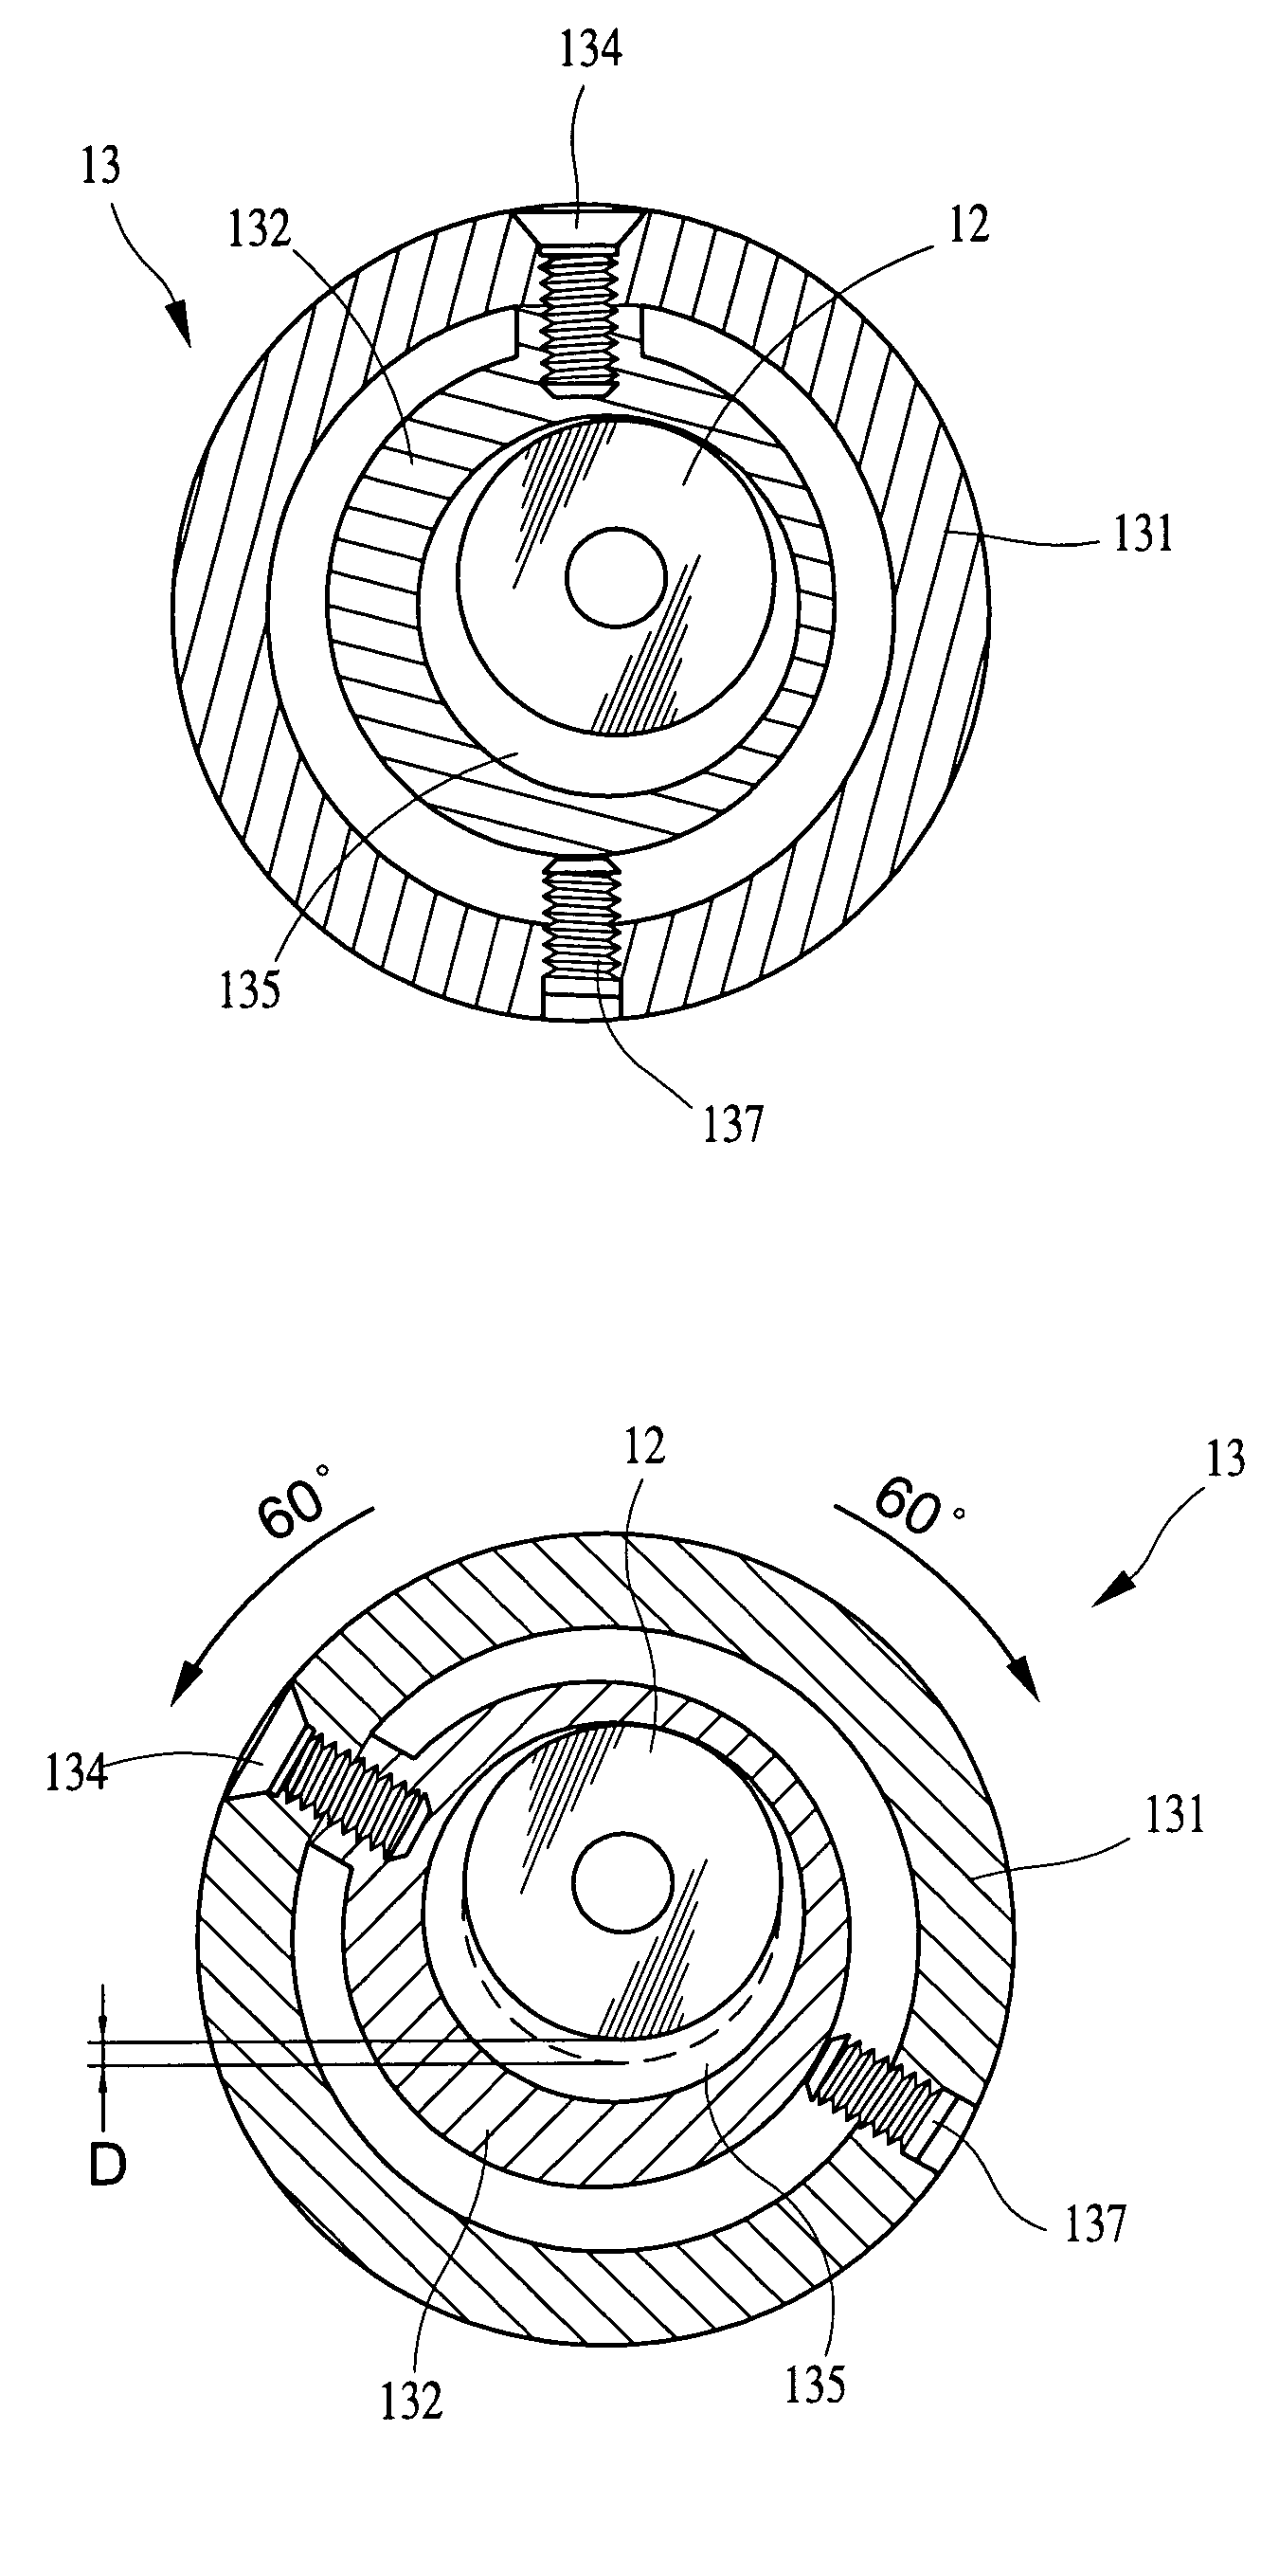 Laser pointer as auxiliary sight of firearm